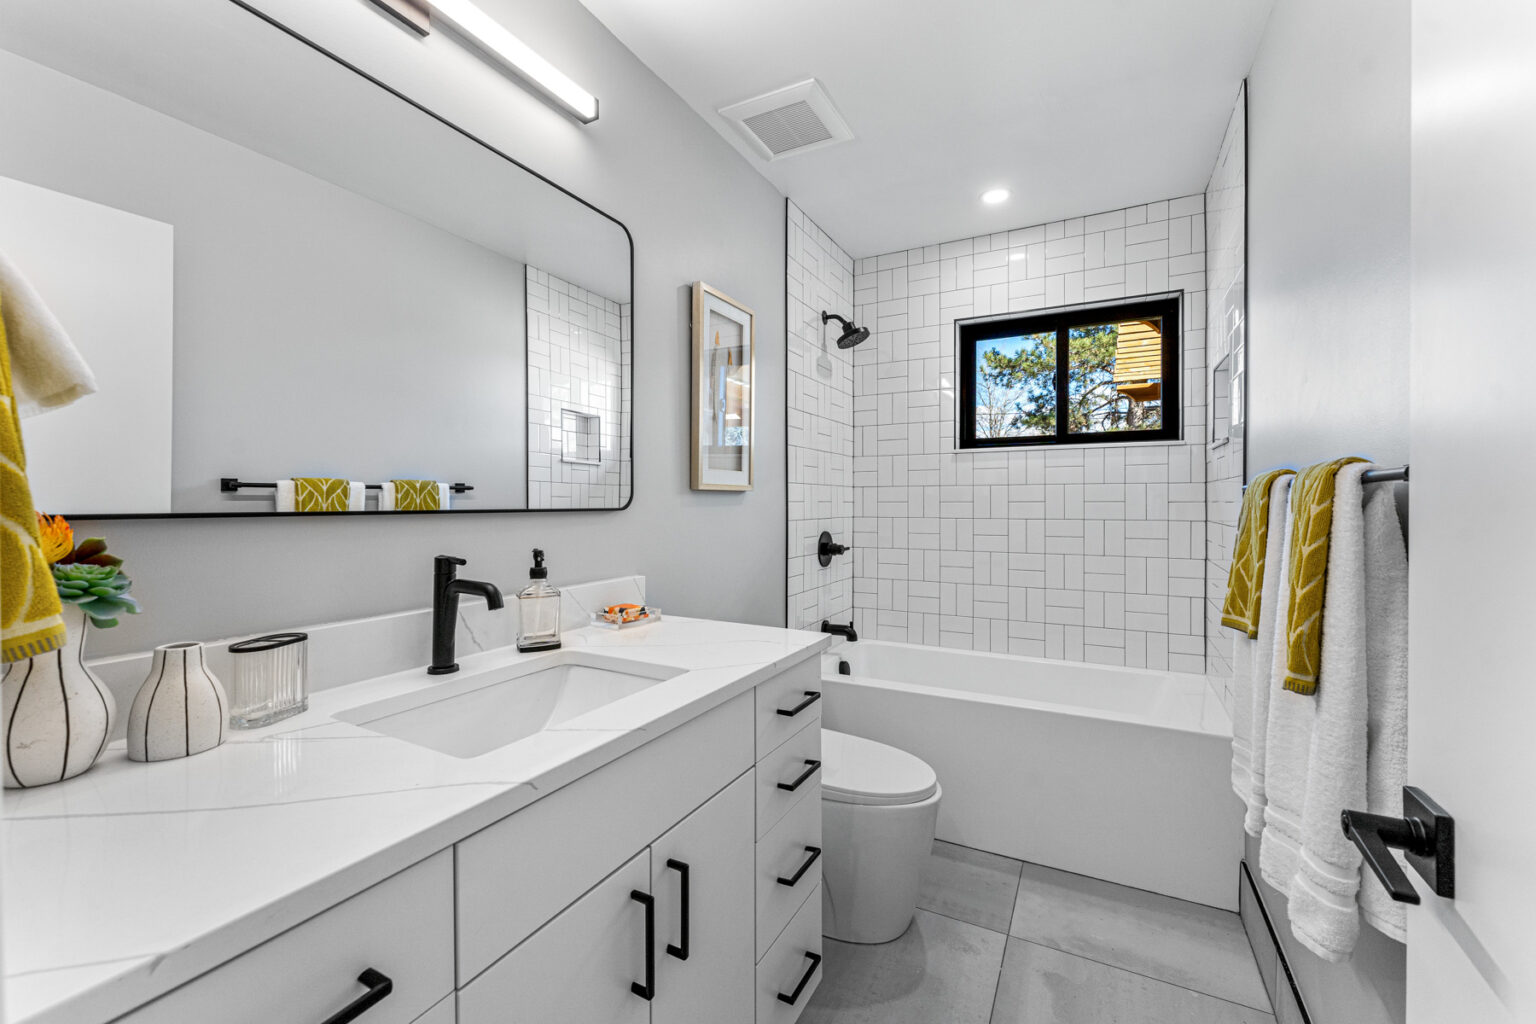 Remodeled bathroom as part of a complete basement finishing in Boulder, Colorado.